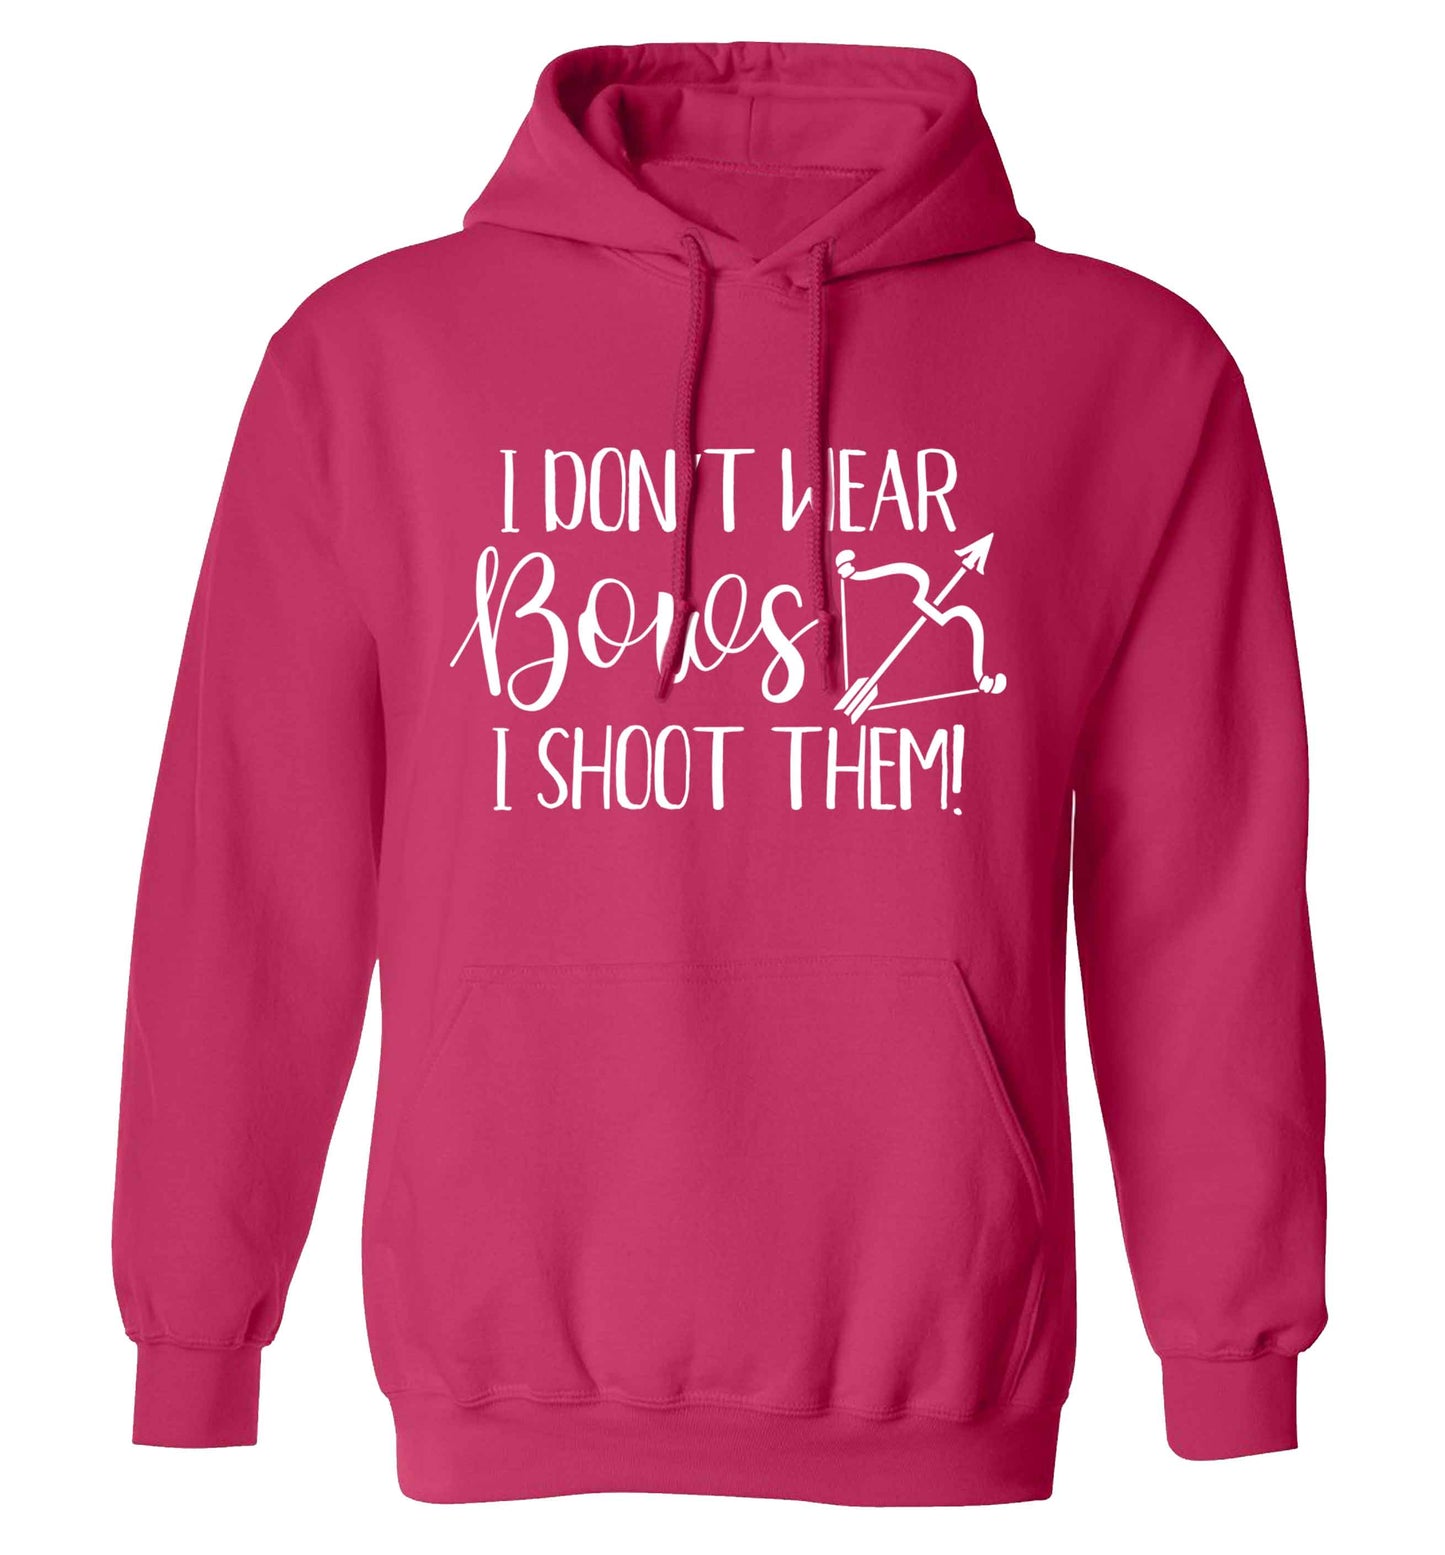 I don't wear bows I shoot them adults unisex pink hoodie 2XL